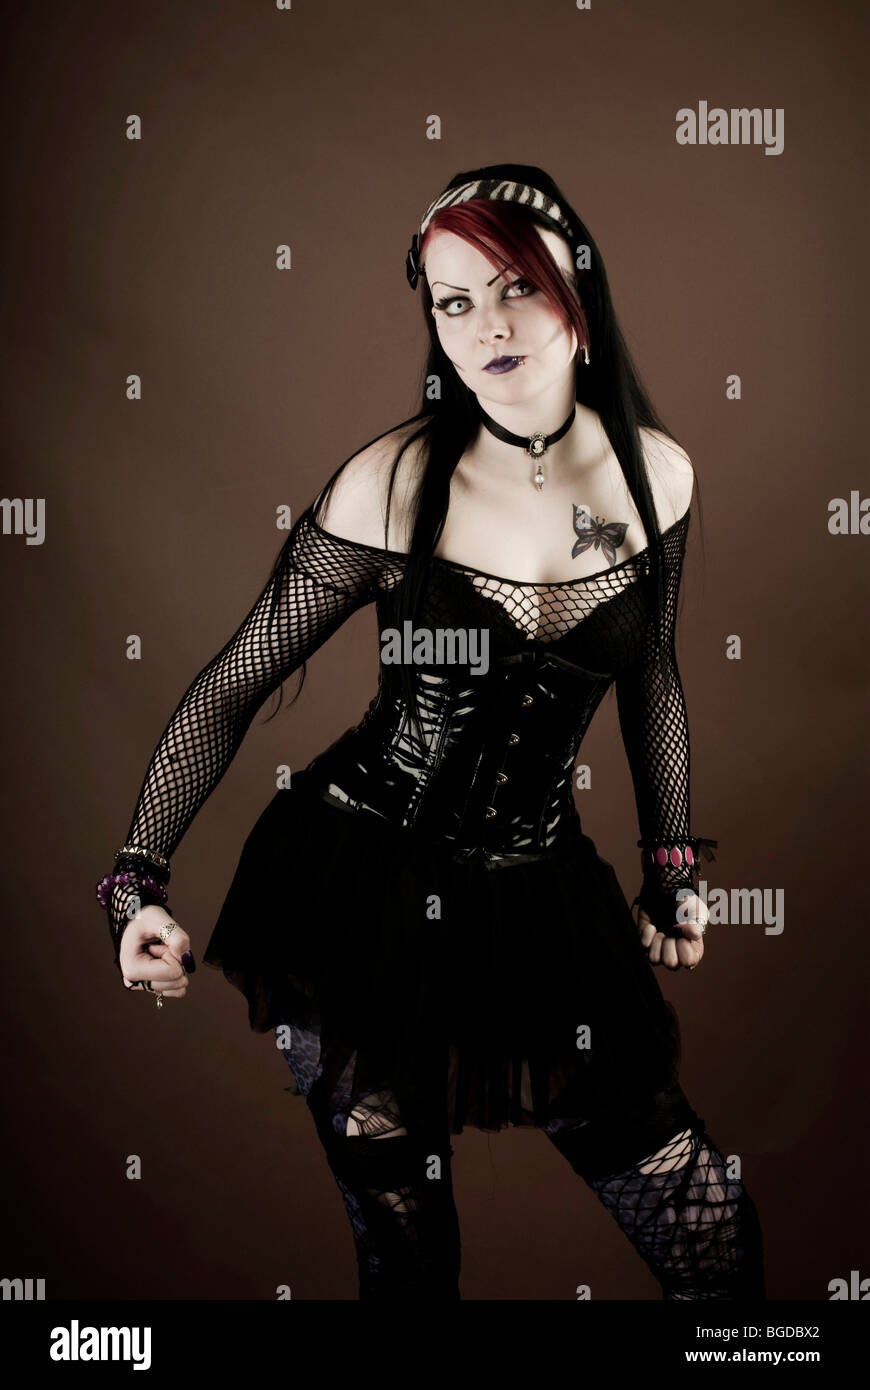 Woman, Gothic style, standing with a serious expression and clenched fists Stock Photo